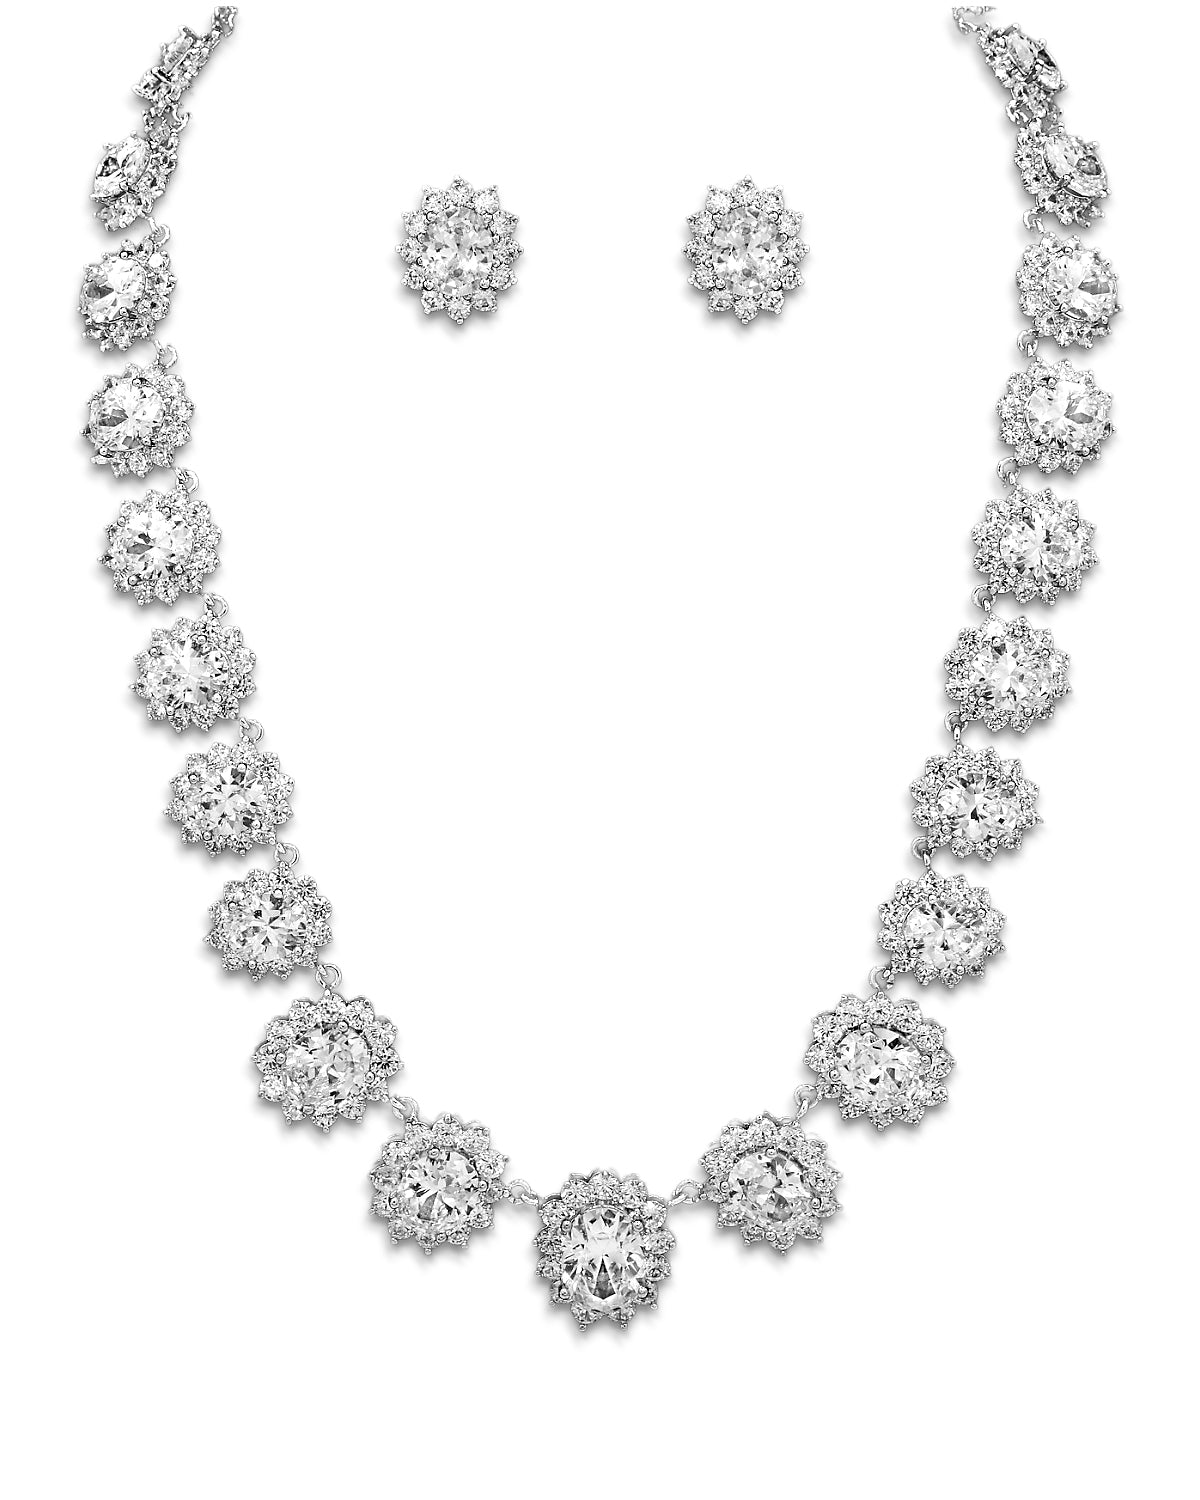 Oval Statement Style Wedding Necklace